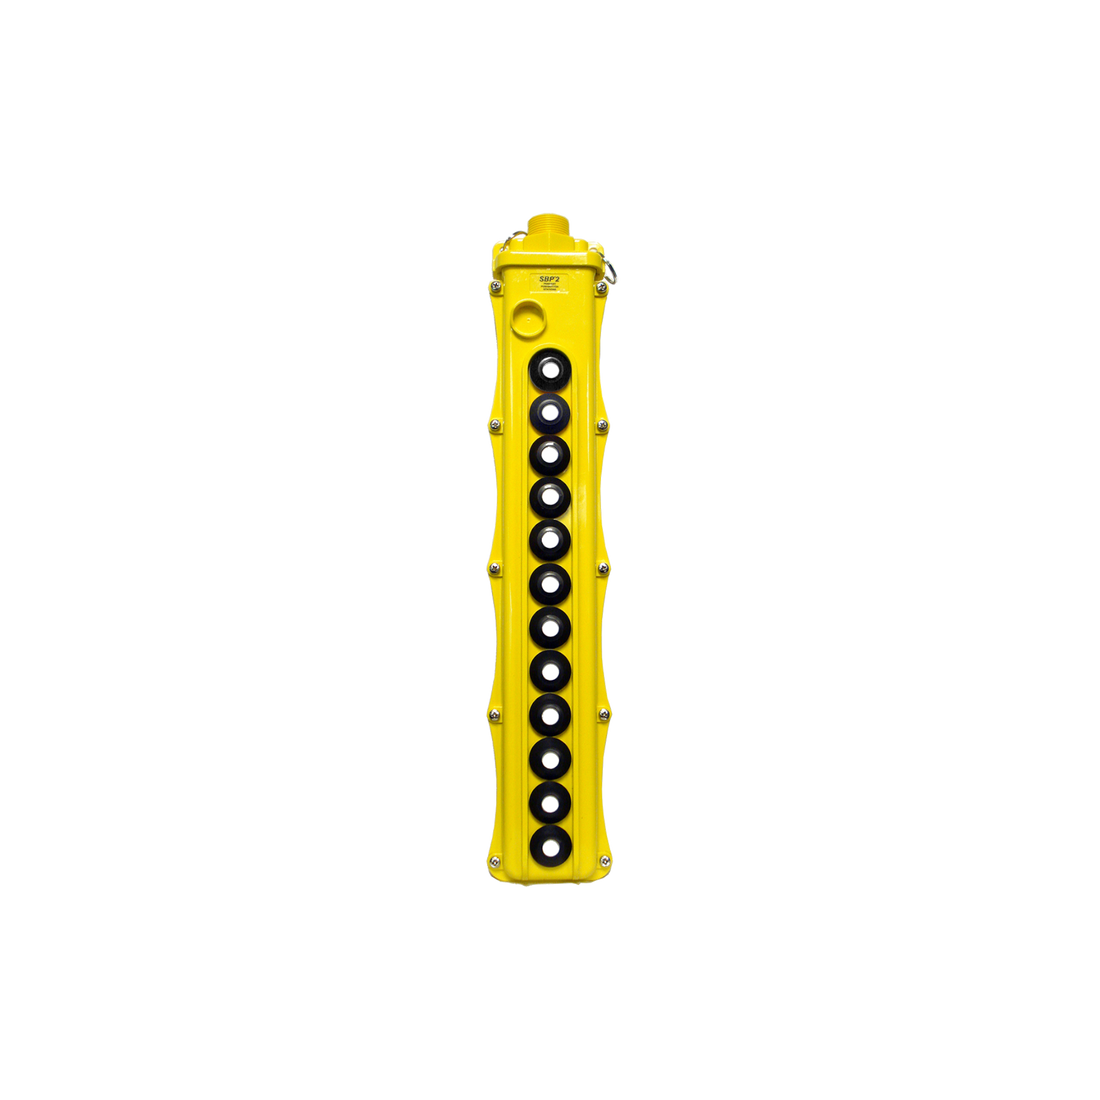 12-Button Pendant, Single-, Dual-, and Three-Speed Switches (SBP2-12-WA,-WS,-WT); Color: Yellow